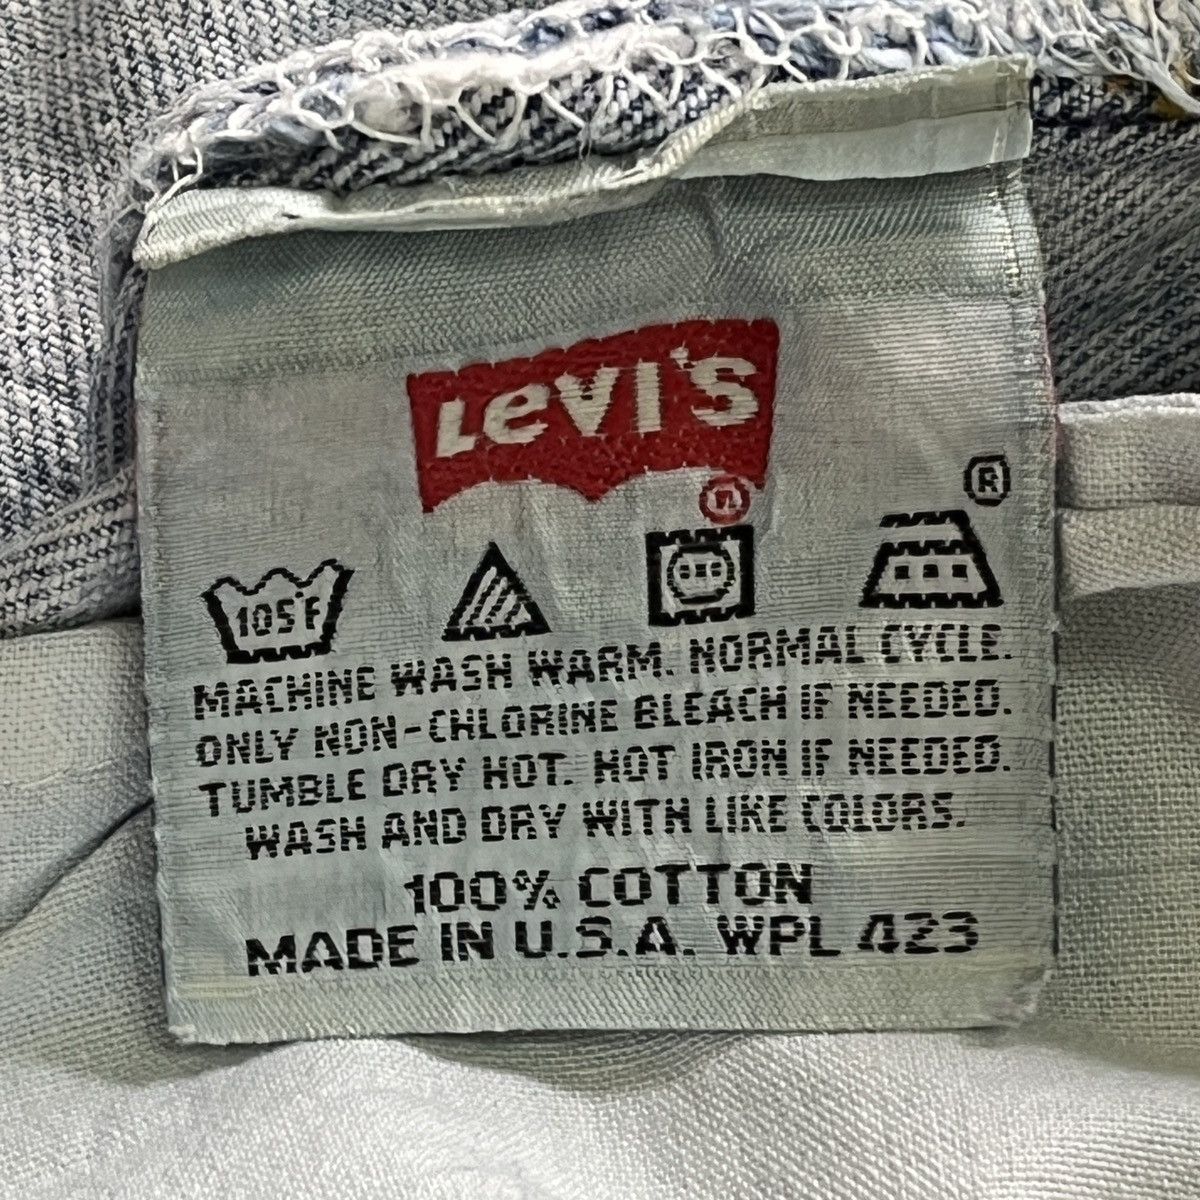 Vintage Levis 501 X Optimist Buttons Crafted - 21